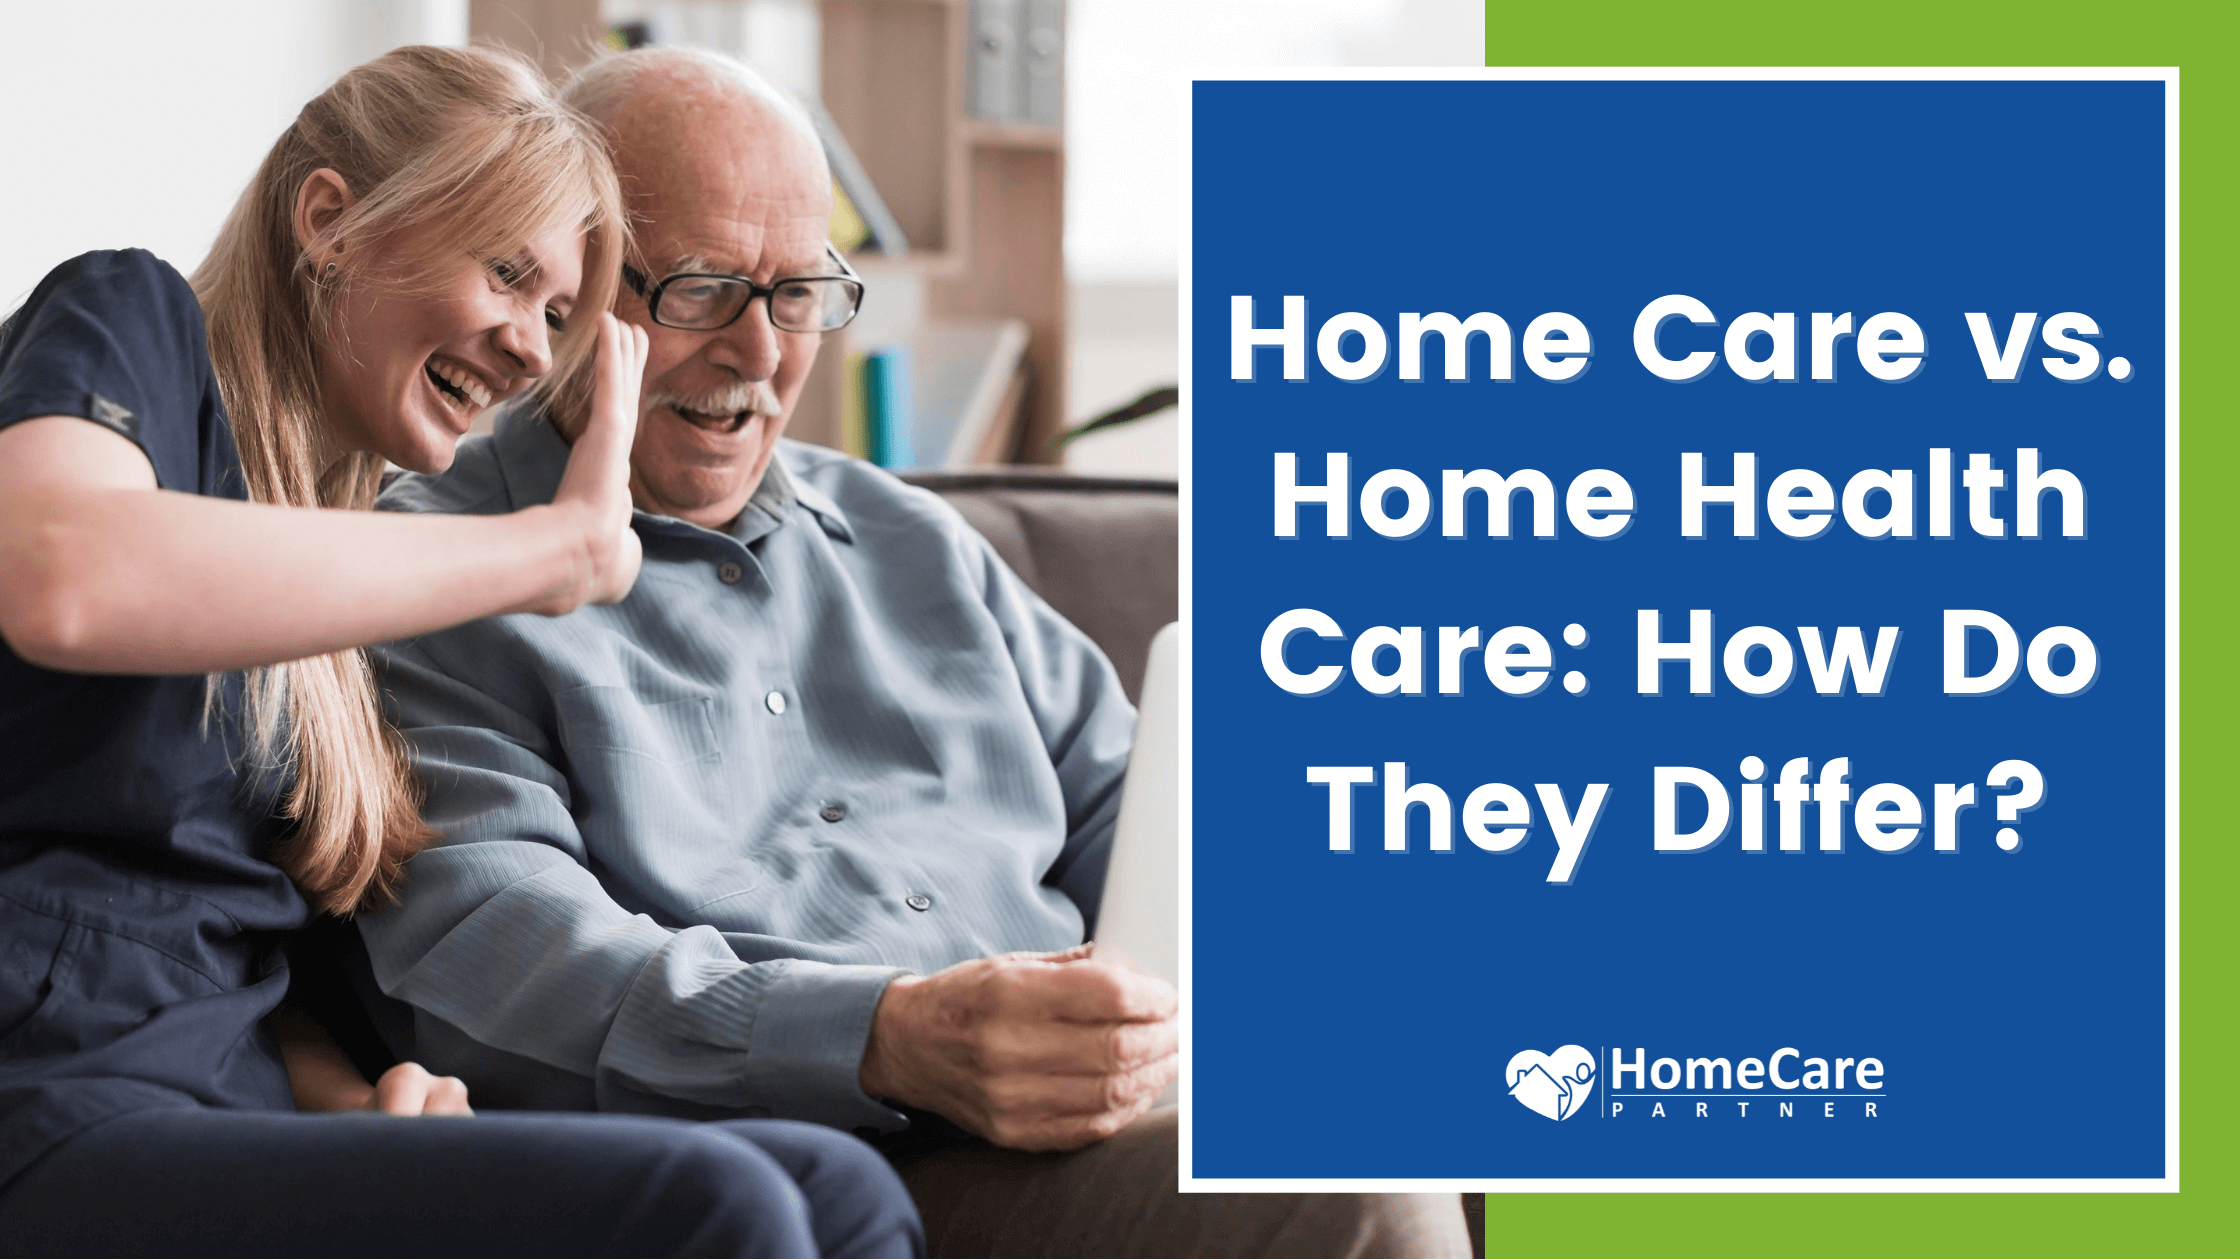 Home Care vs. Home Health Care: How Do They Differ?